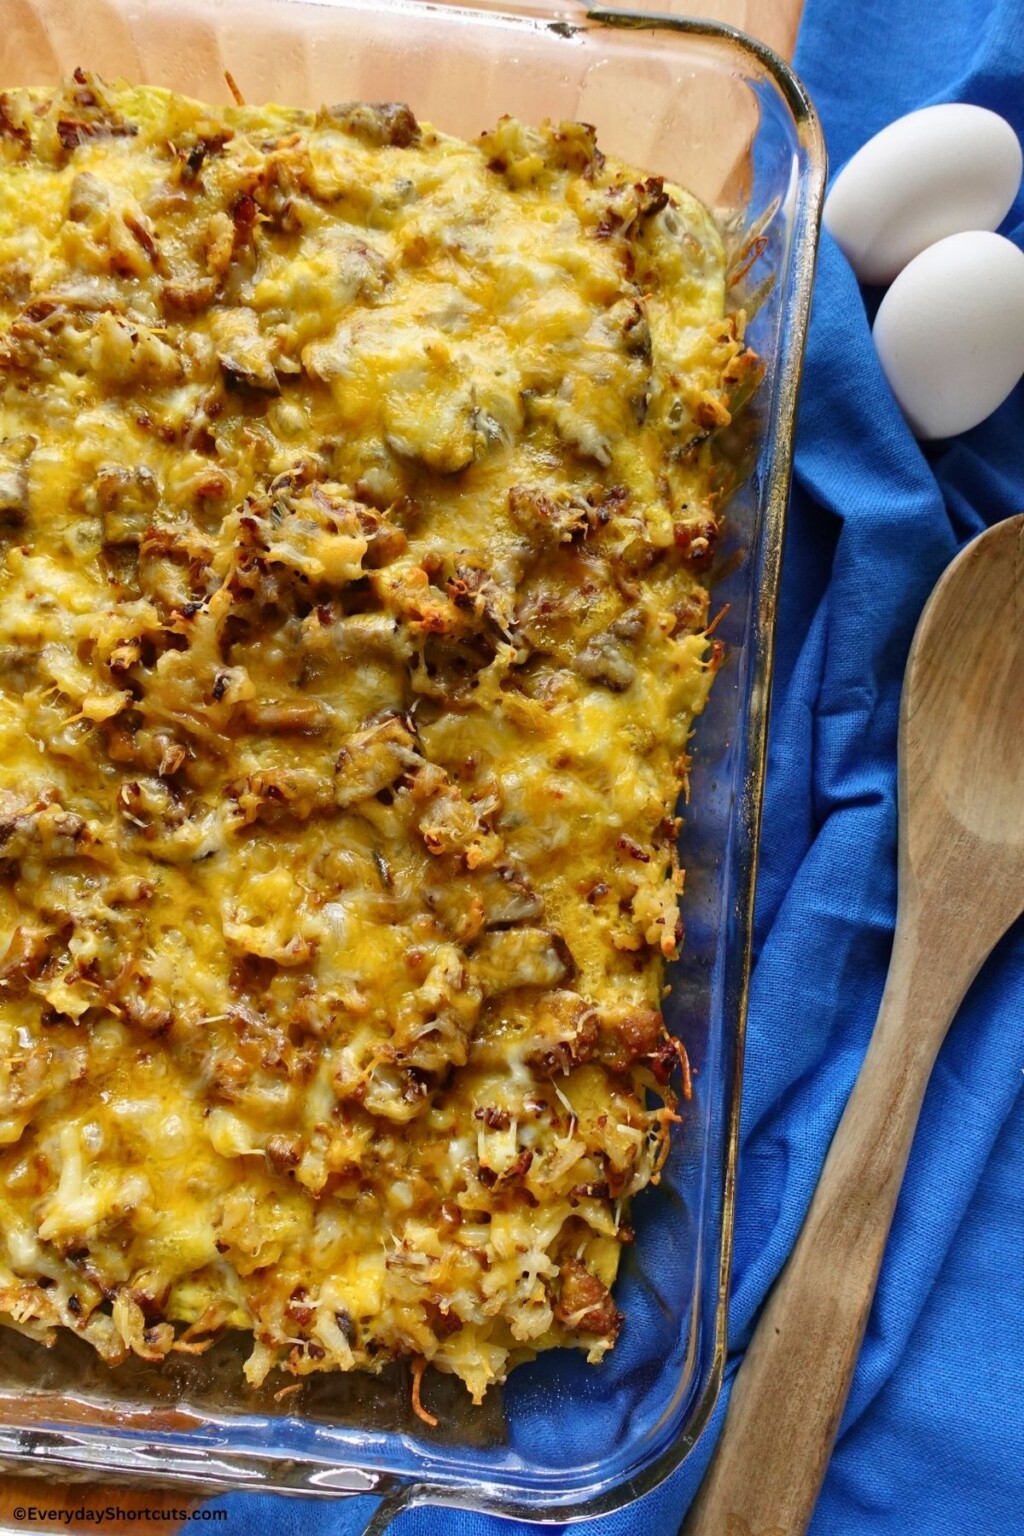 Steak and Egg Casserole - Everyday Shortcuts